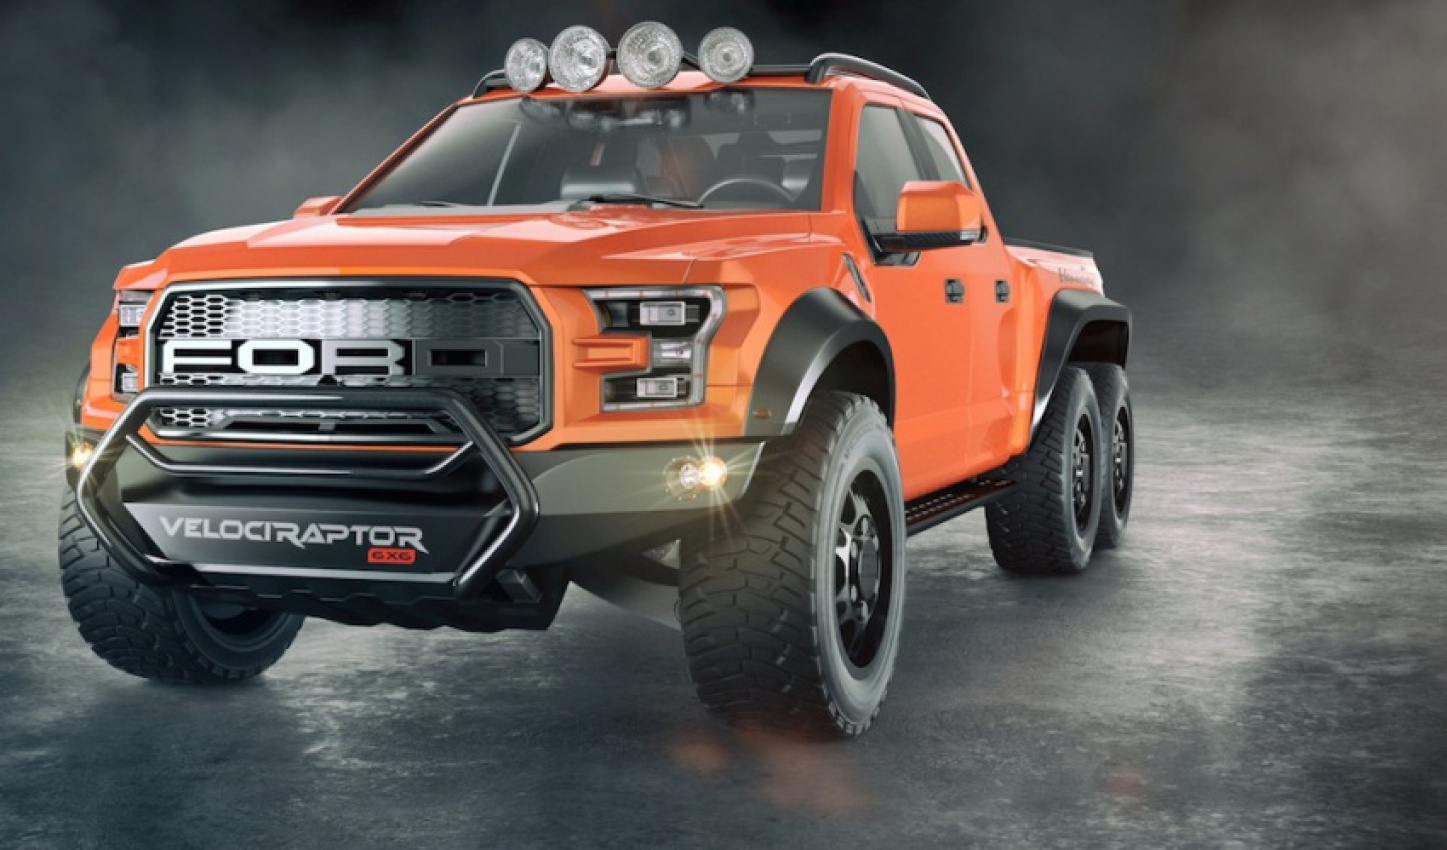 autos, cars, hennessey, hp, autos news, hennessey adds six wheels and 600hp to its latest custom pickup creation